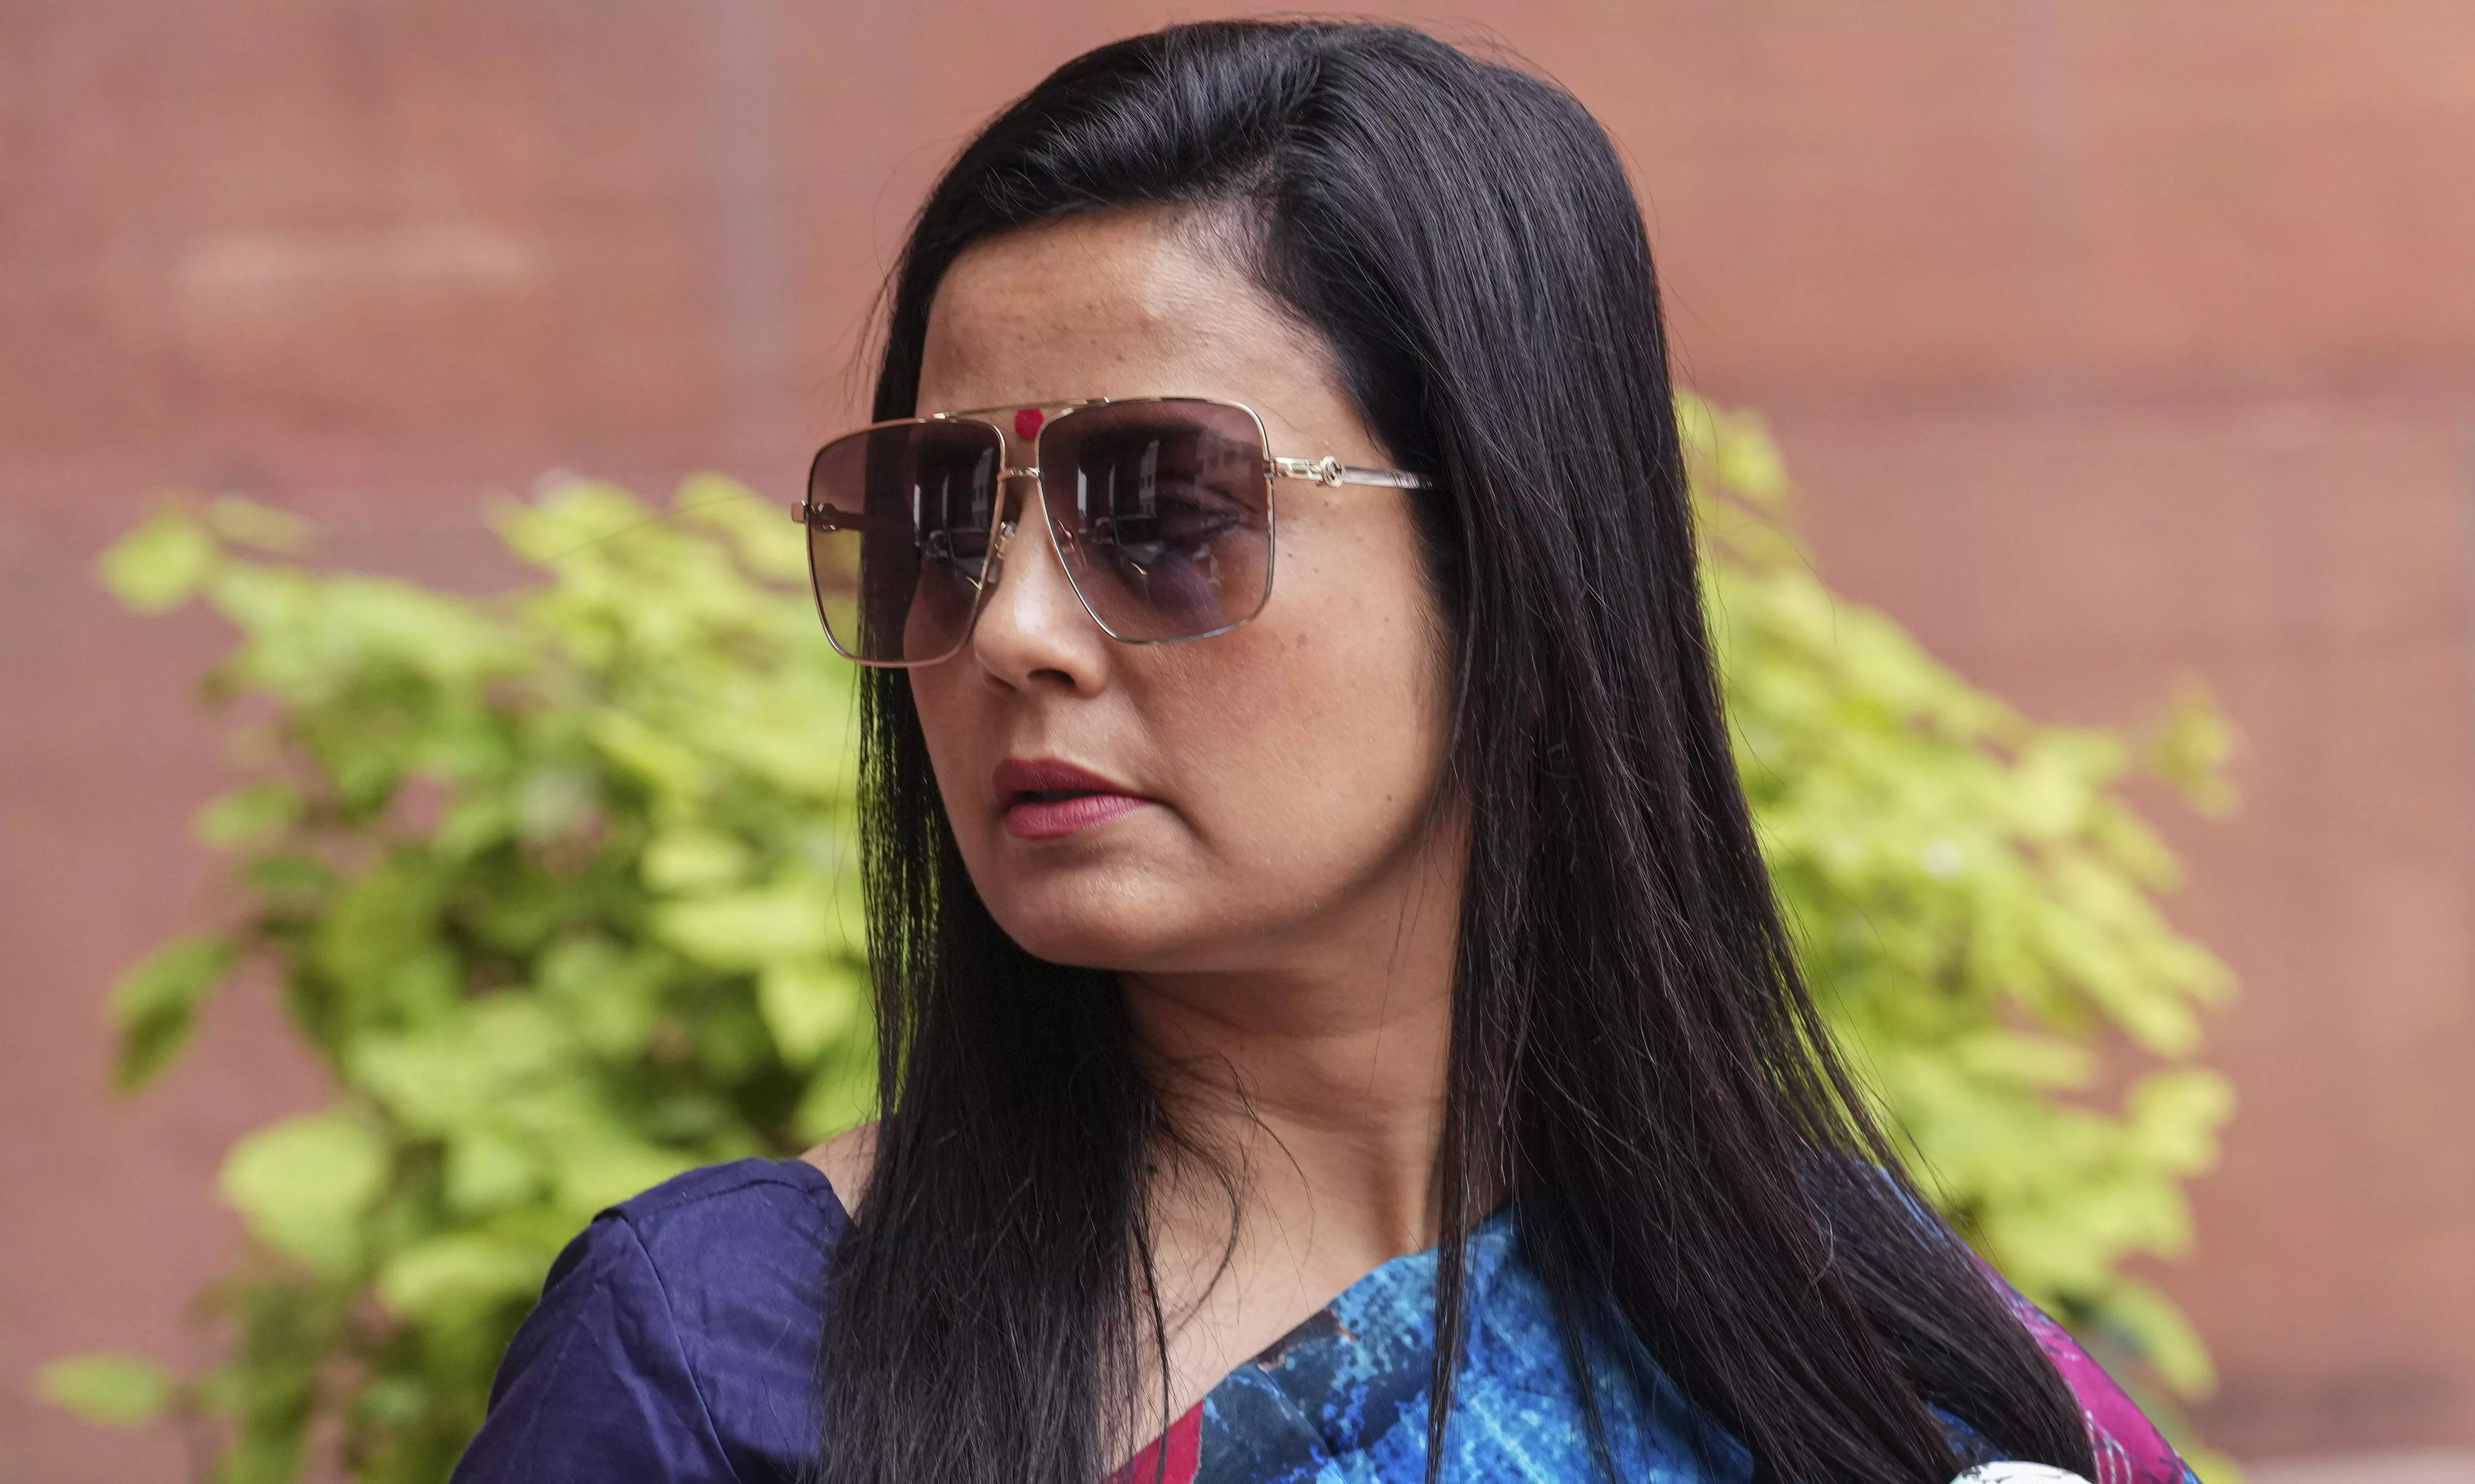 Cash-for-query case: Mahua Moitra appears before LS ethics panel